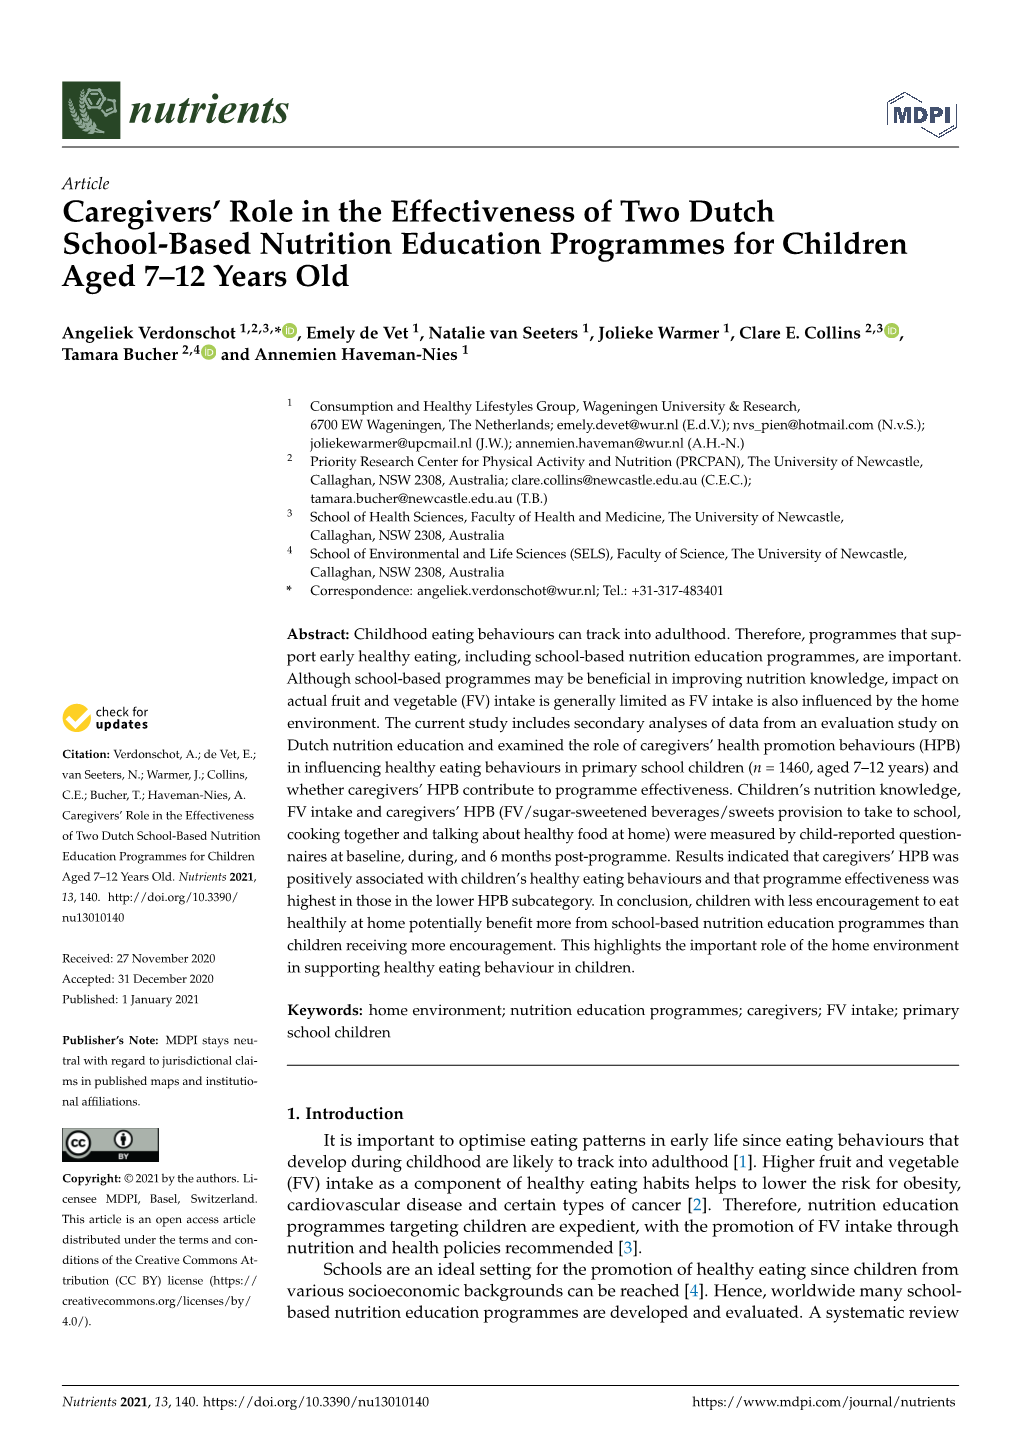 Caregivers' Role in the Effectiveness of Two Dutch School-Based Nutrition Education Programmes for Children Aged 7–12 Years